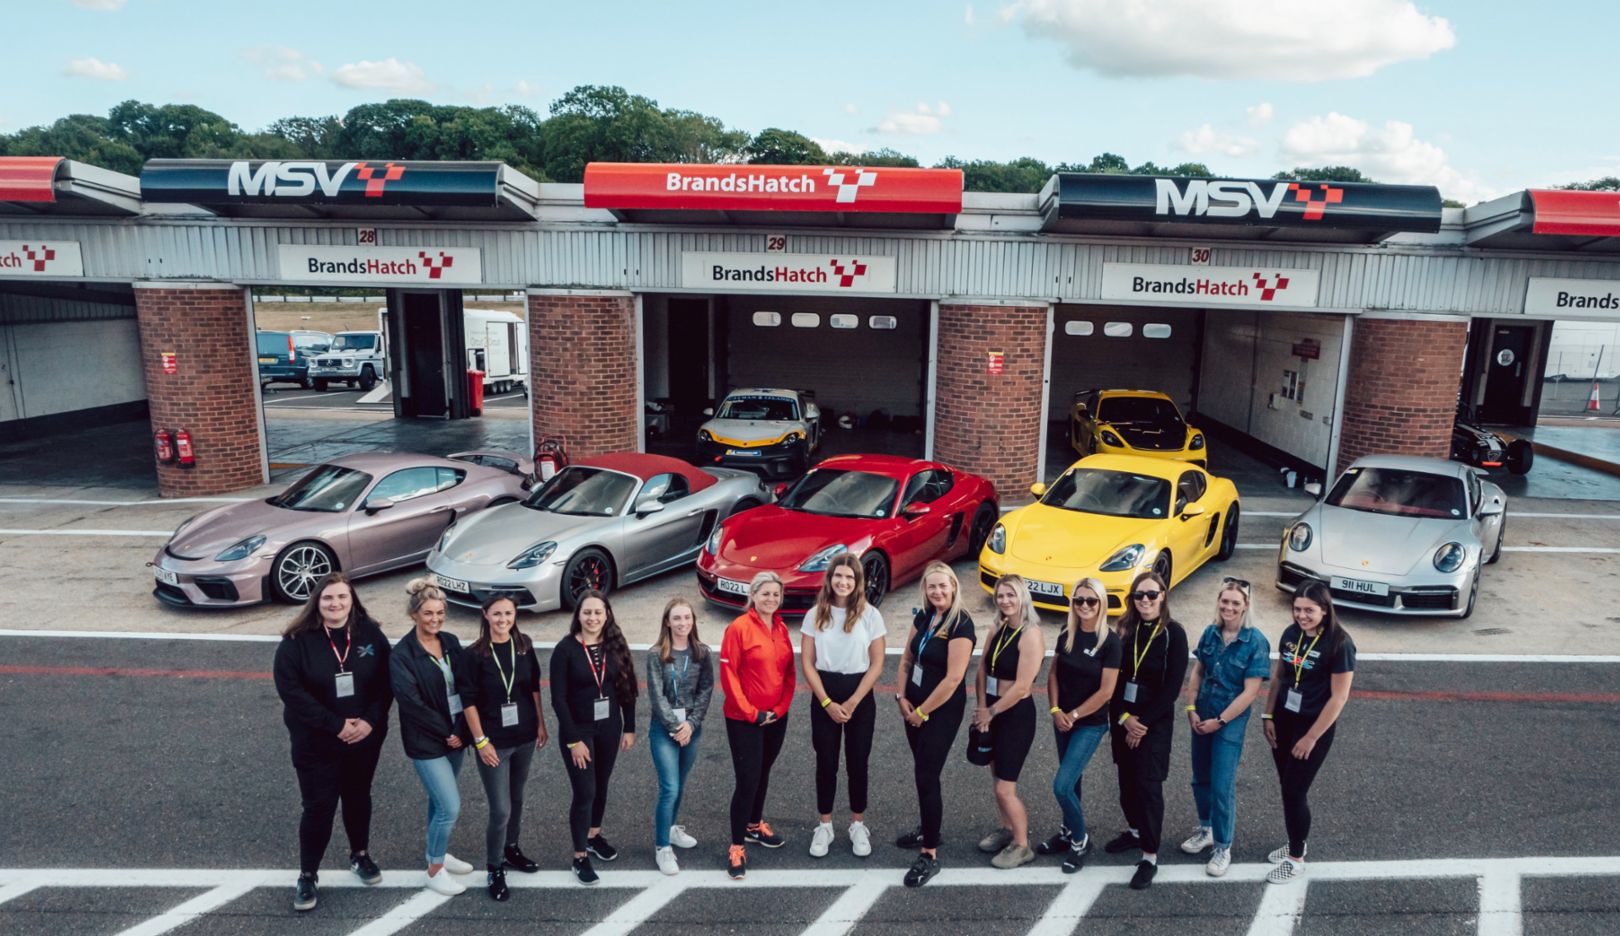 Esmee Hawkey, 718 Cayman GT4, 718 Cayman GTS 4.0, 718 Boxster GTS 4.0, 718 Cayman, 911 Turbo S, &quot;We Drive with Esmee Hawkey&quot; Event, Brands Hatch, Great Britain, 2022, Porsche Cars Great Britain